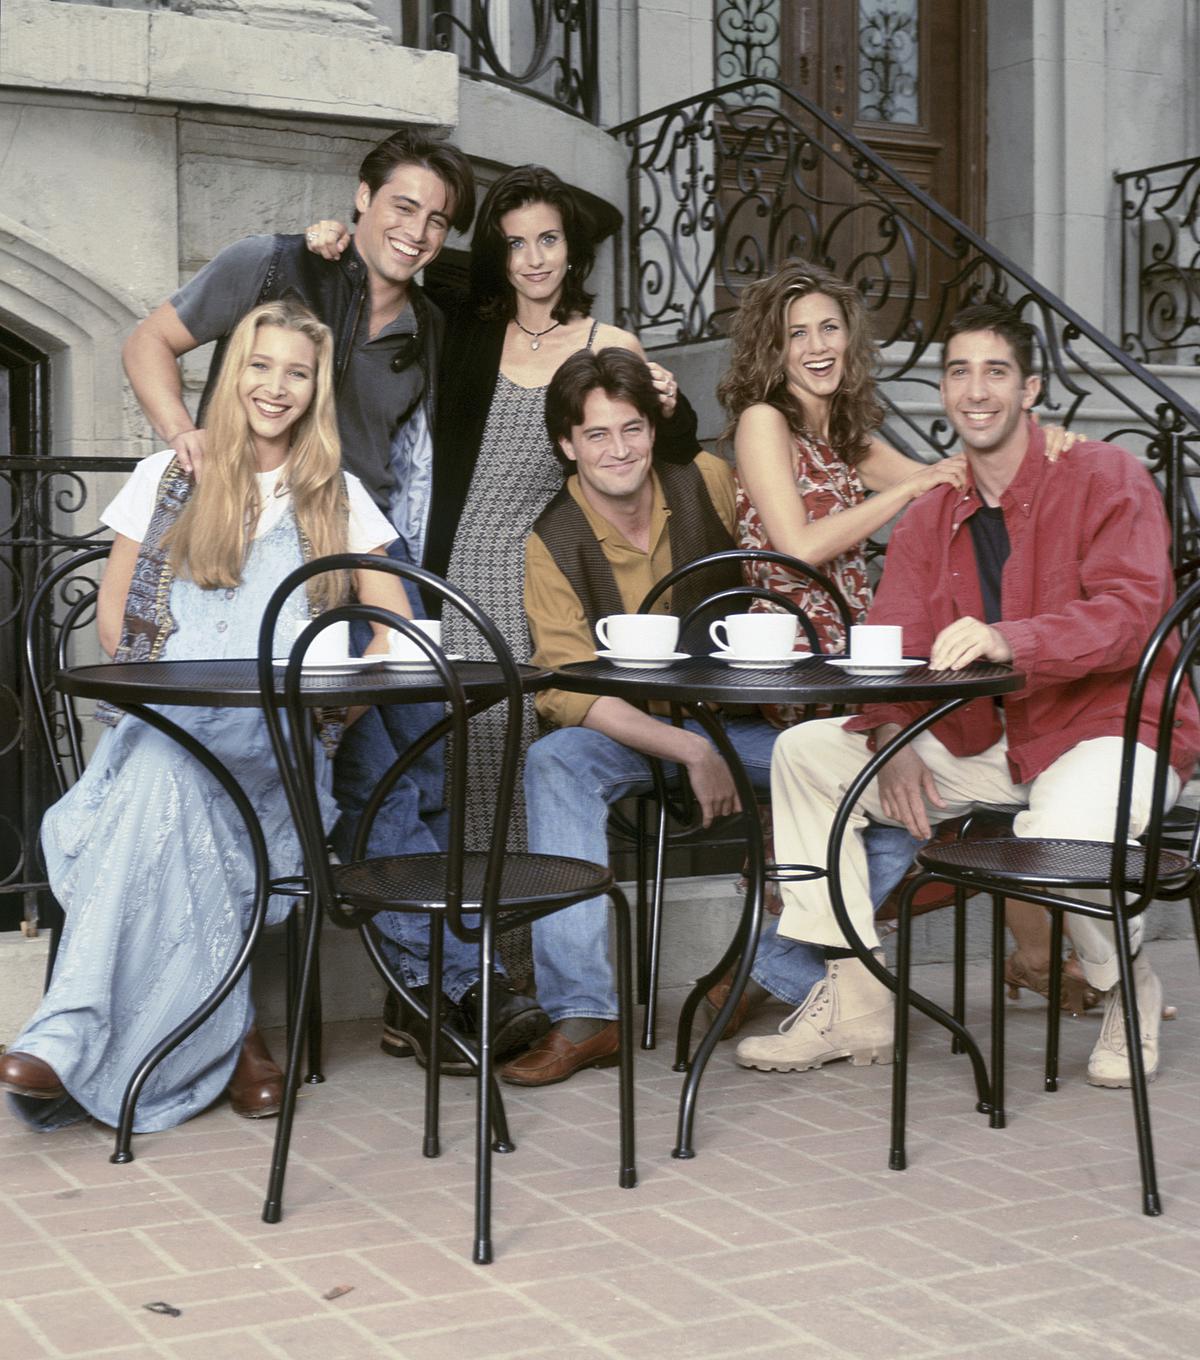 The main cast of ‘Friends’.